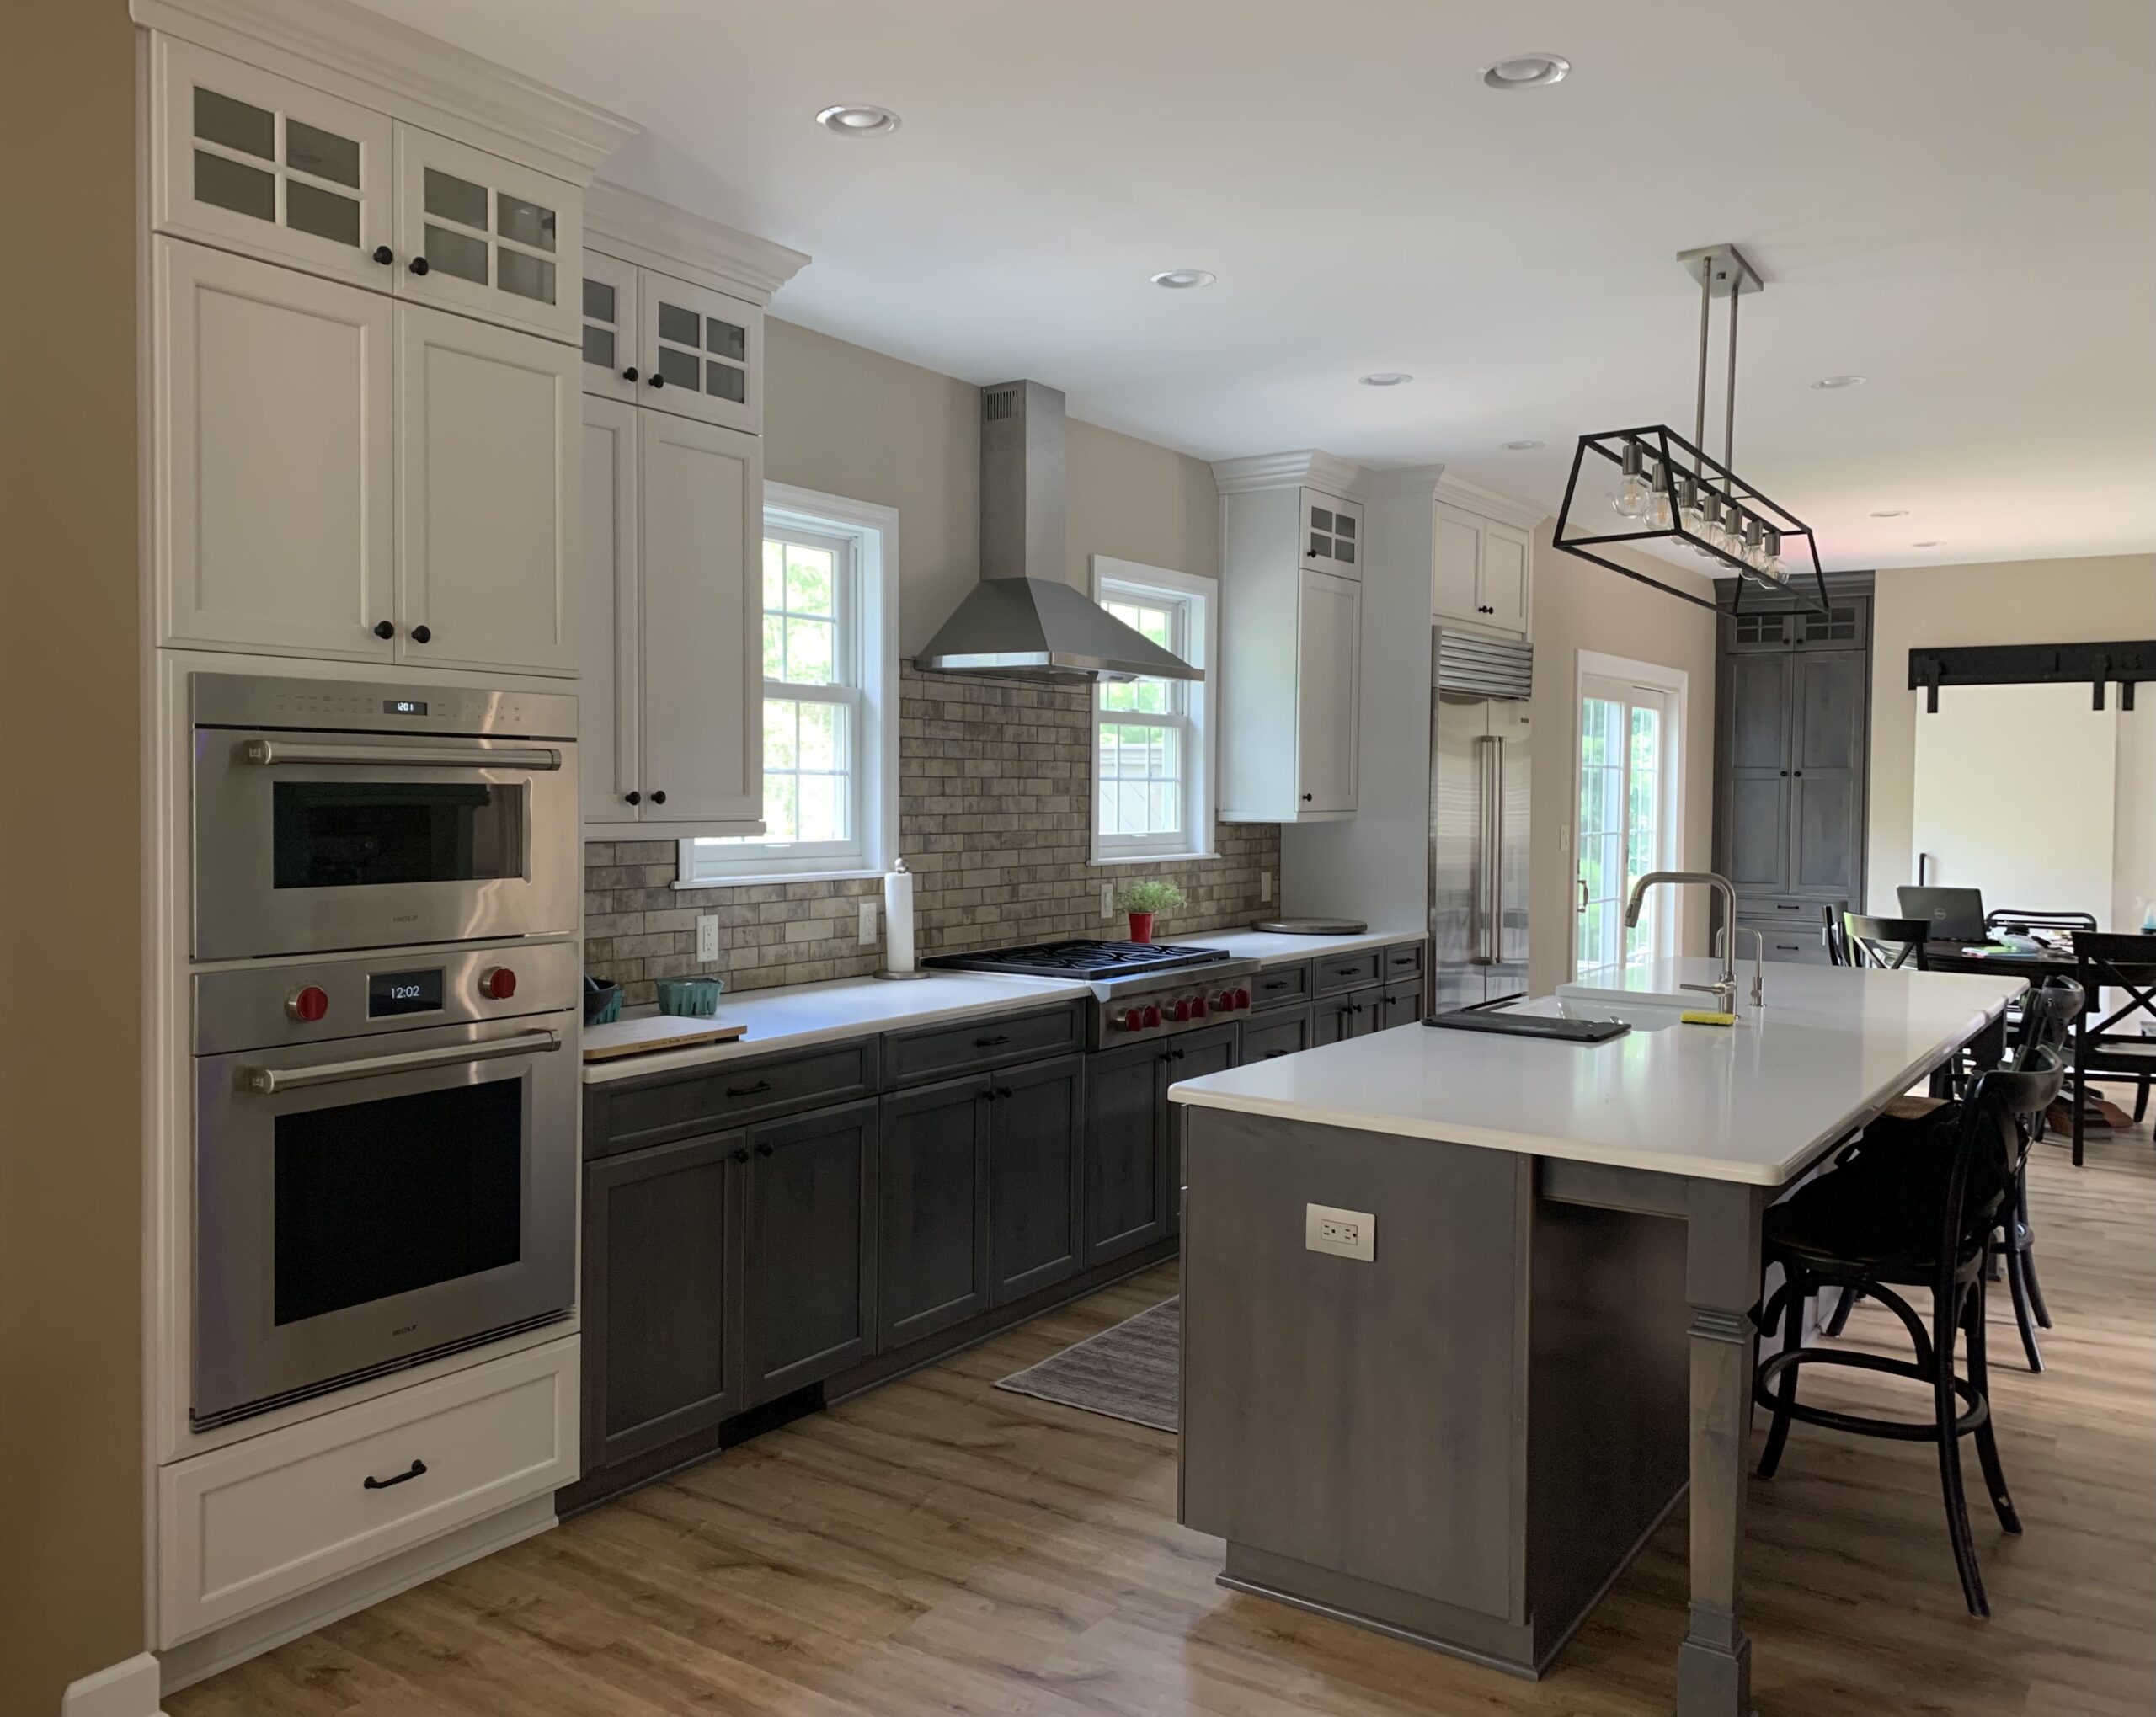 Modern kitchen remodel, island with grey cabinets and white countertop, white wall cabinets, dark grey base cabinets, subway tile backsplash, traditional cooker hood